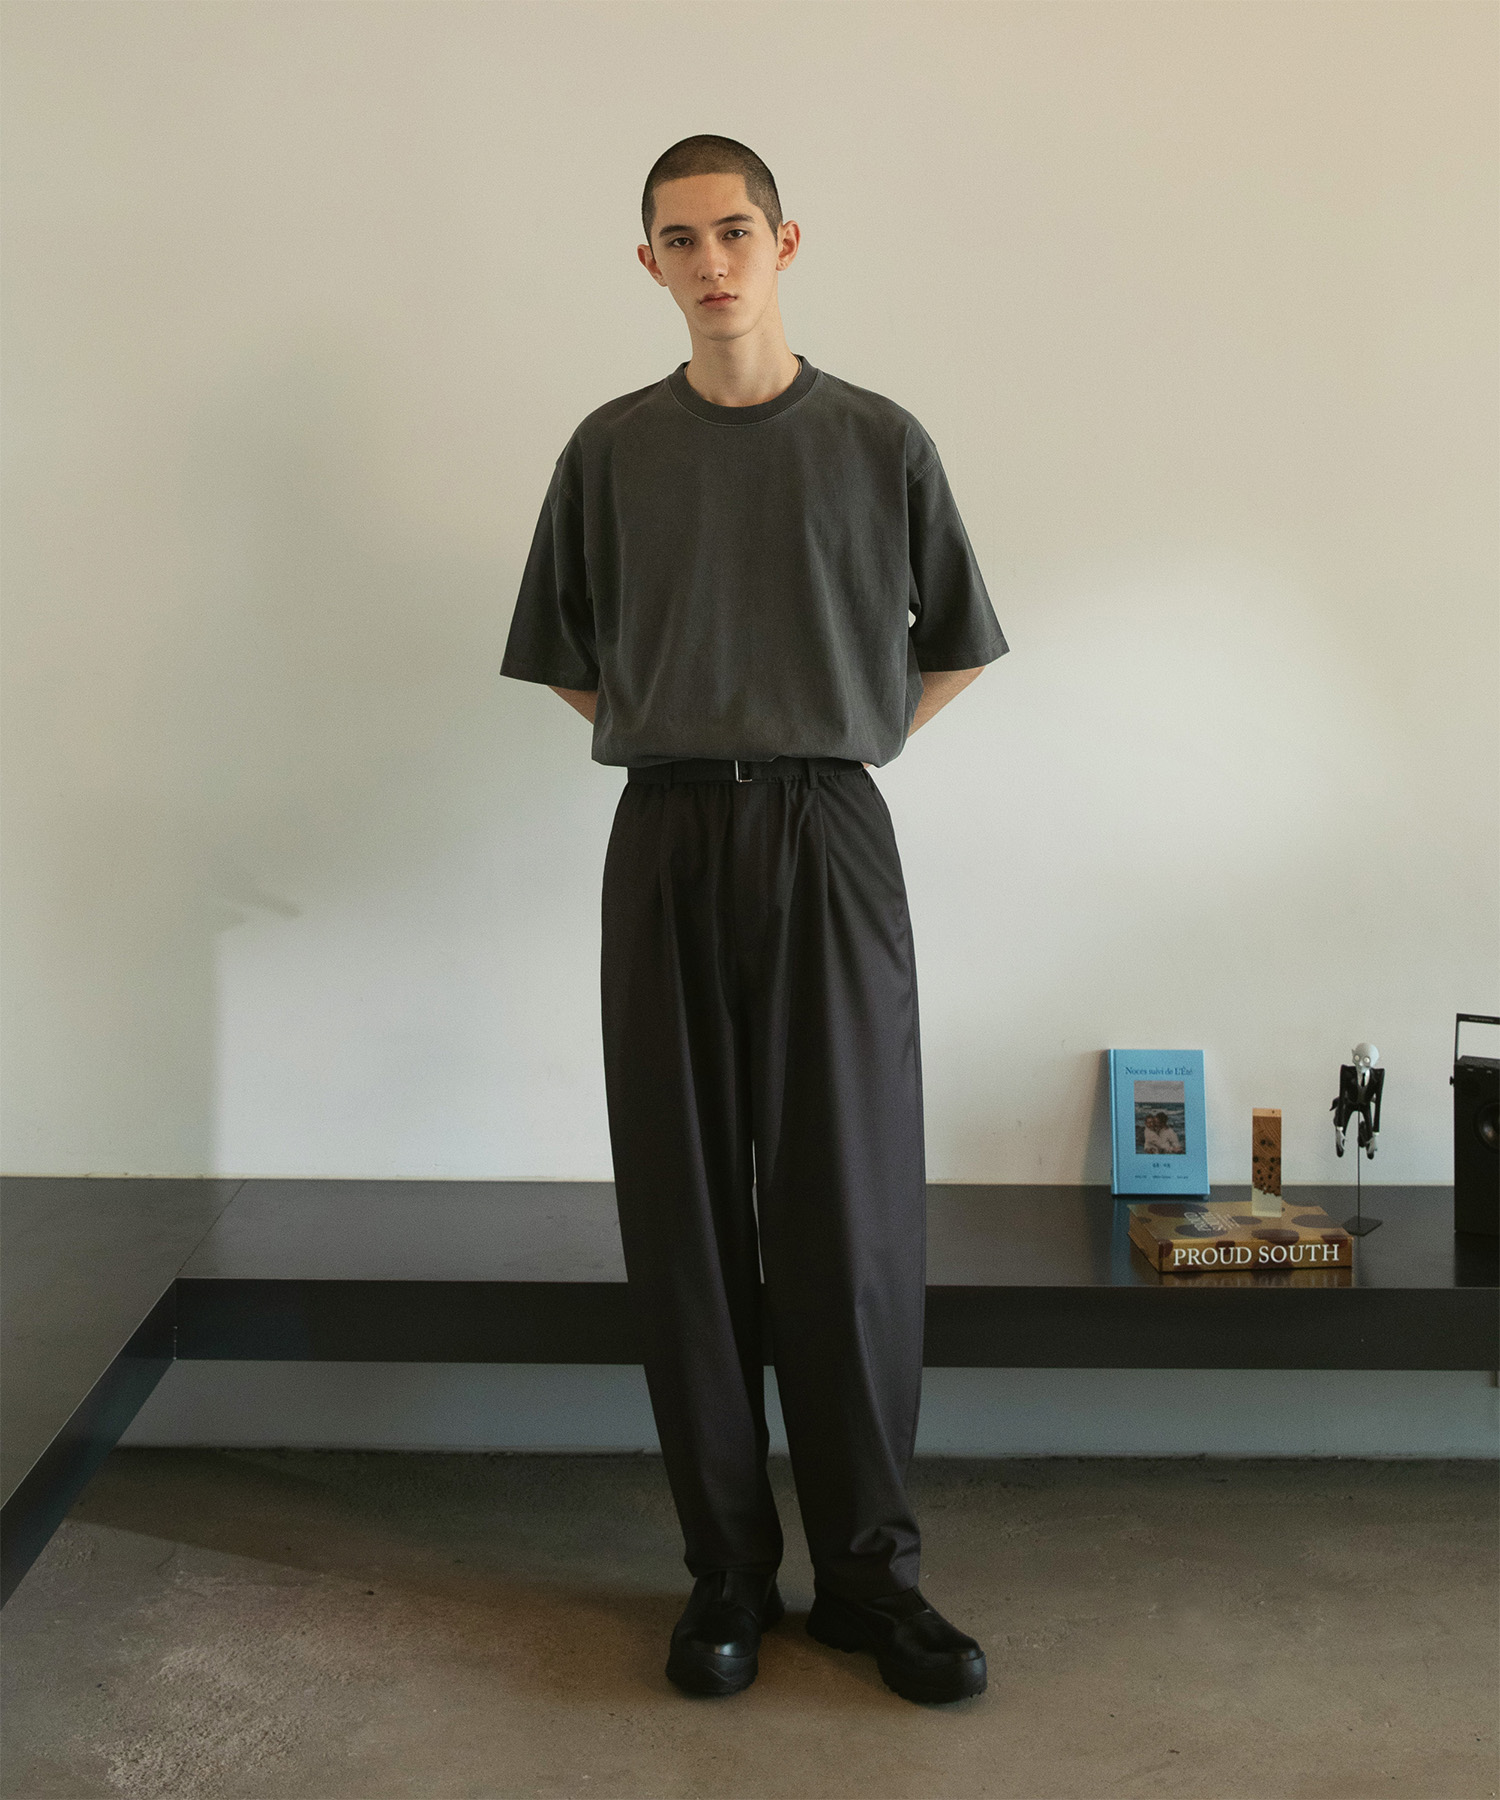 24SS Cocoon Banded Pants (Charcoal)